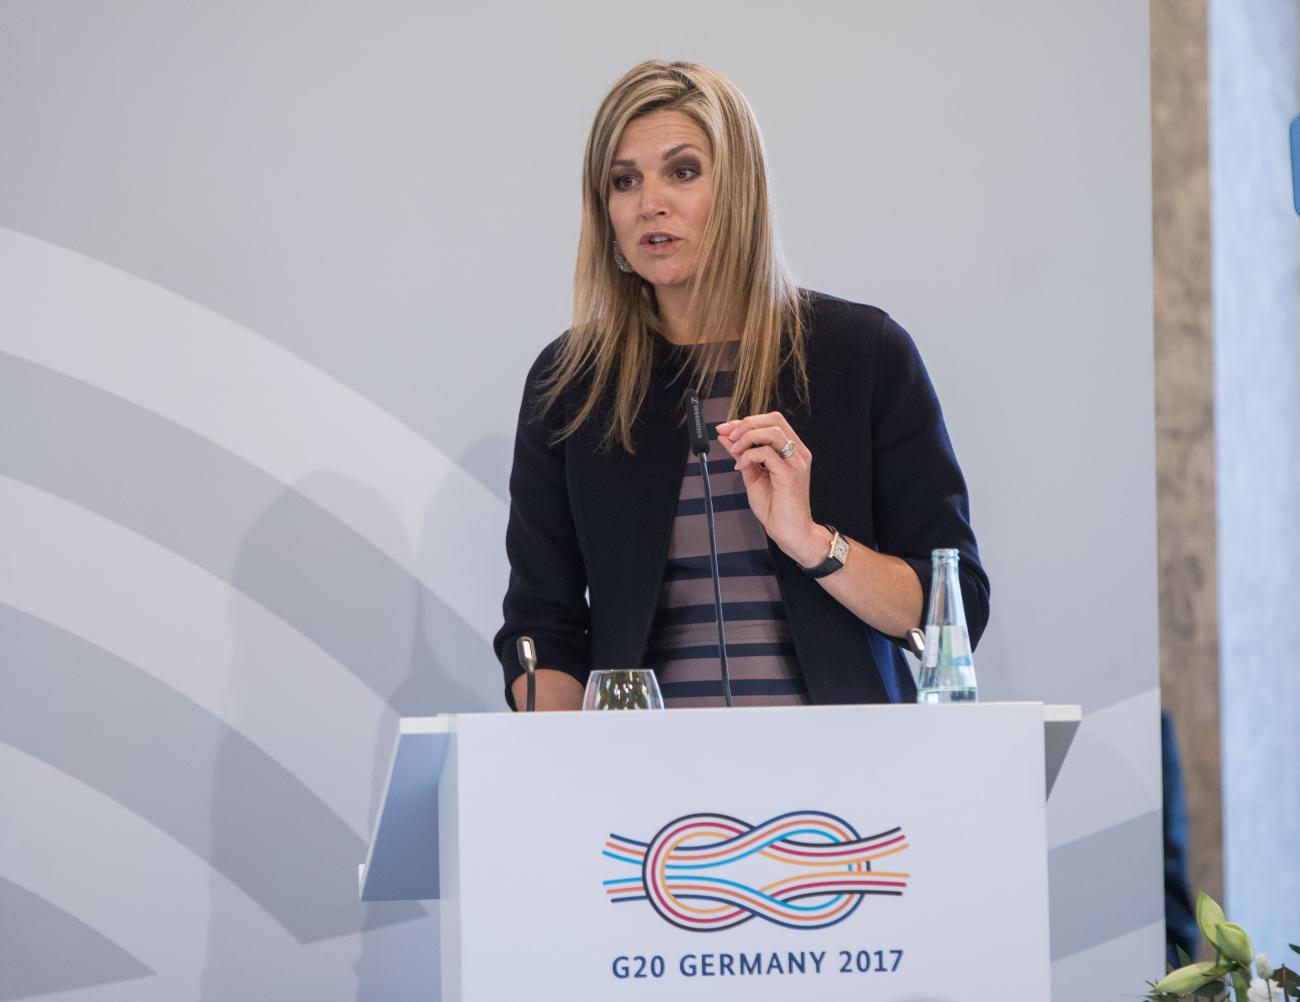 The Special Advocate's speech on digital financial inclusion launched the G20 conference in Wiesbaden.